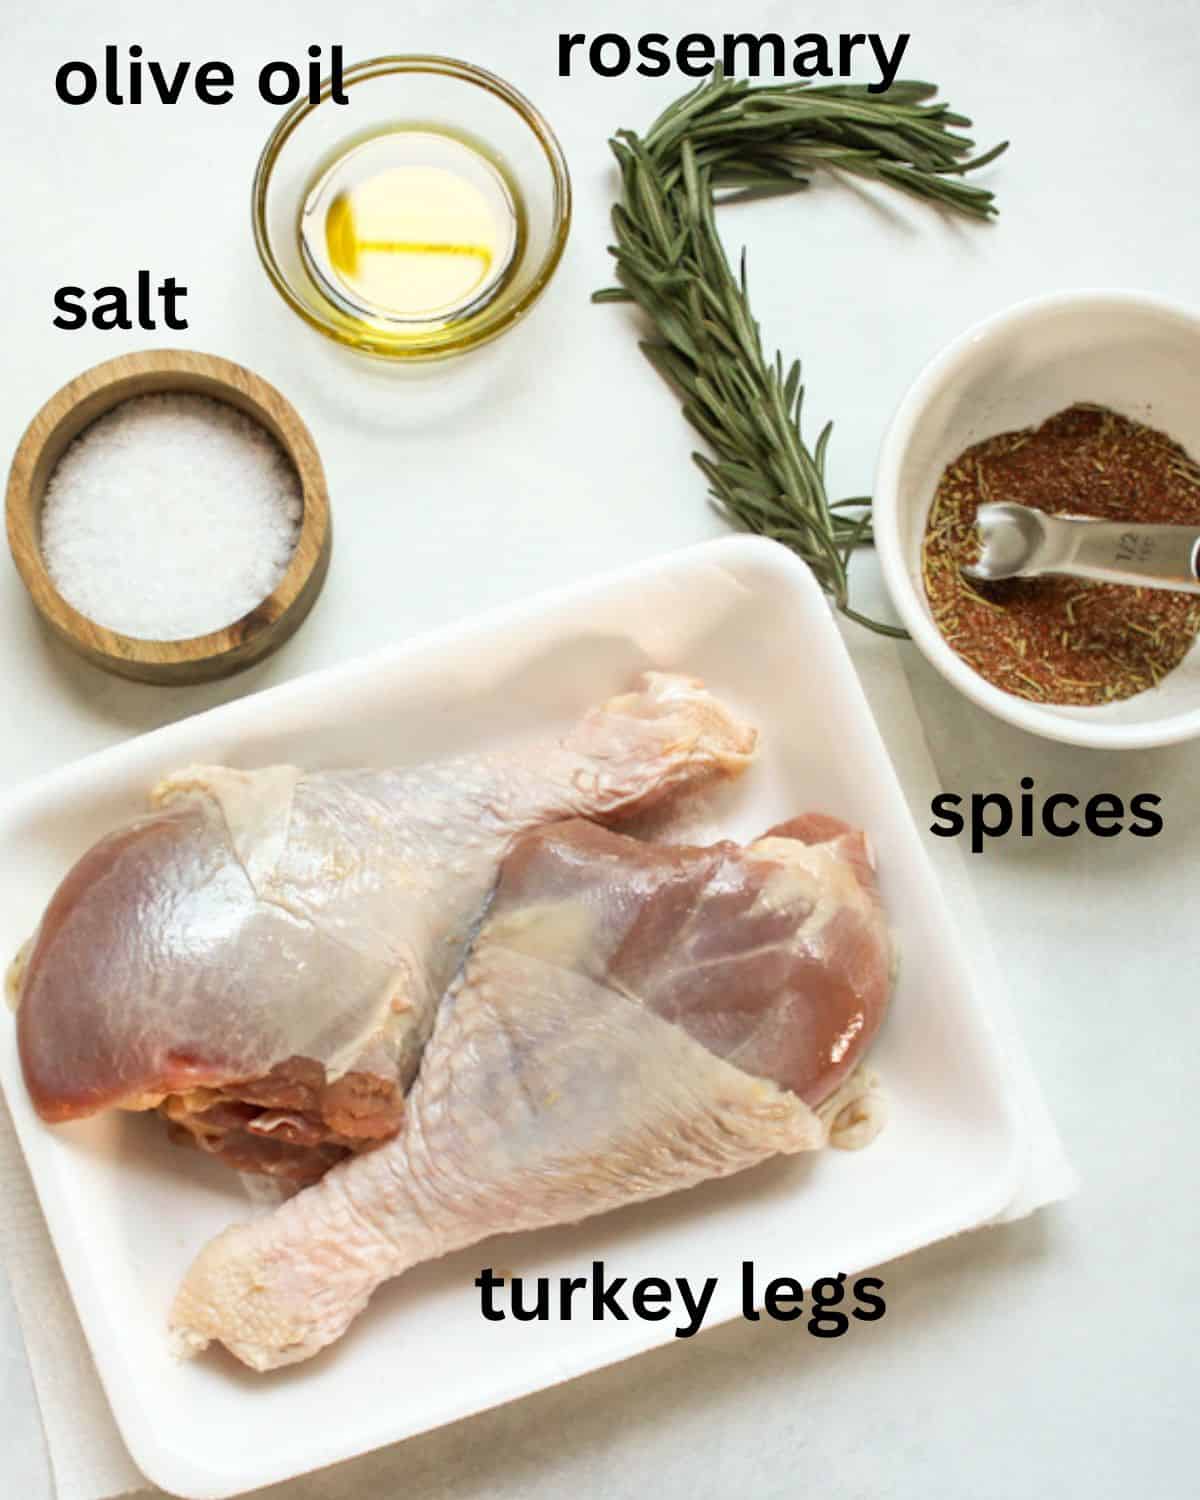 Recipe ingredients on a white background labeled as olive oil, rosemary, salt, spices and turkey legs.